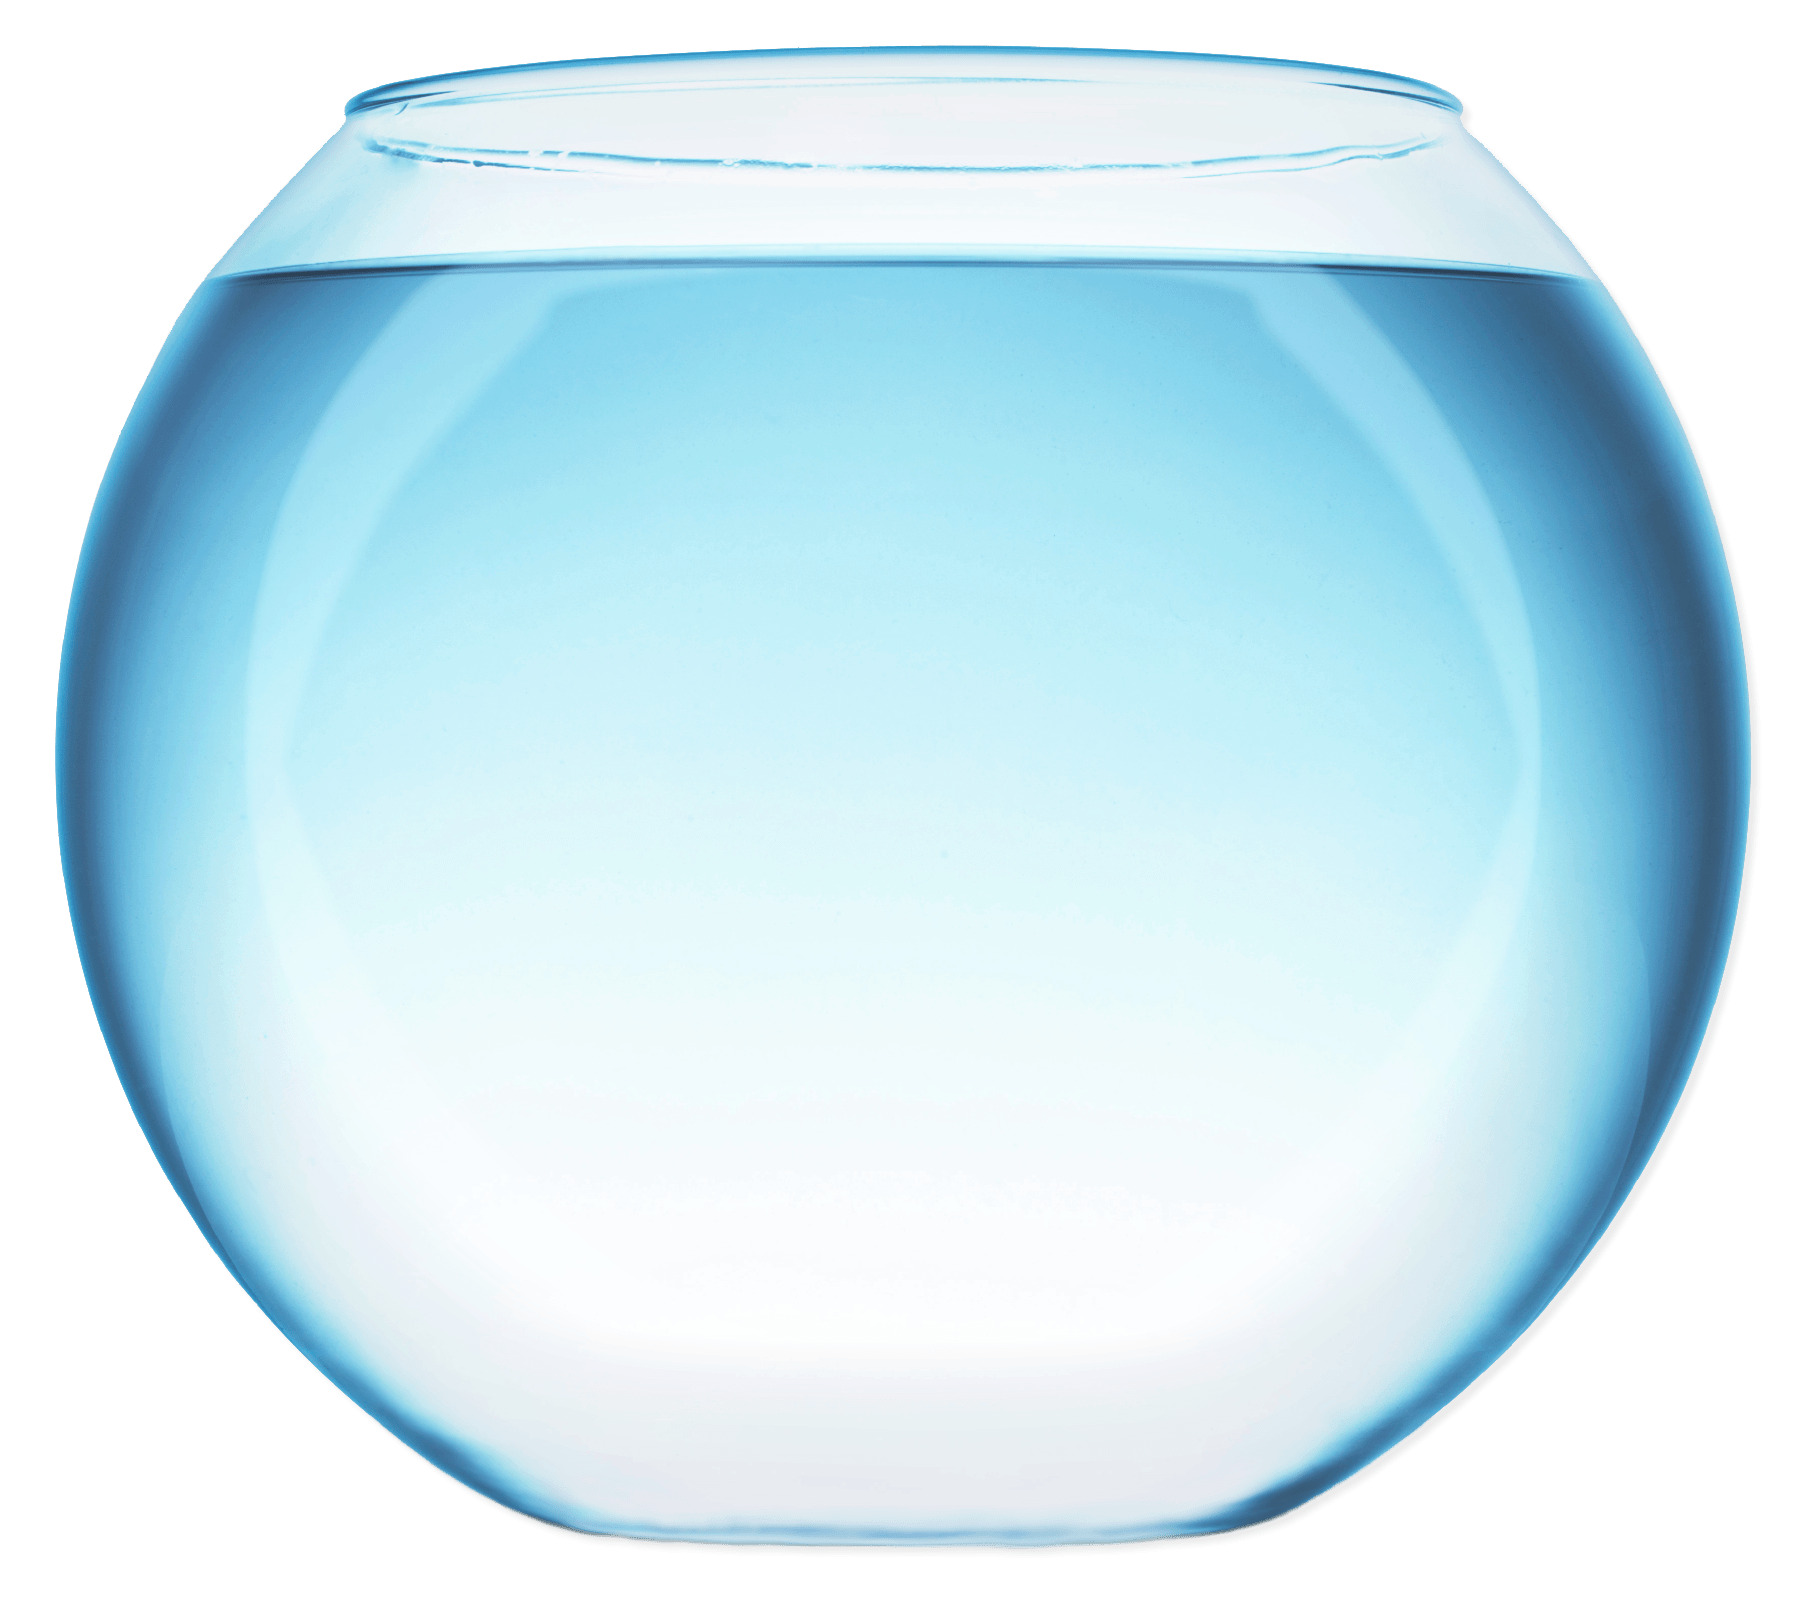 Fish Bowl With Water icons